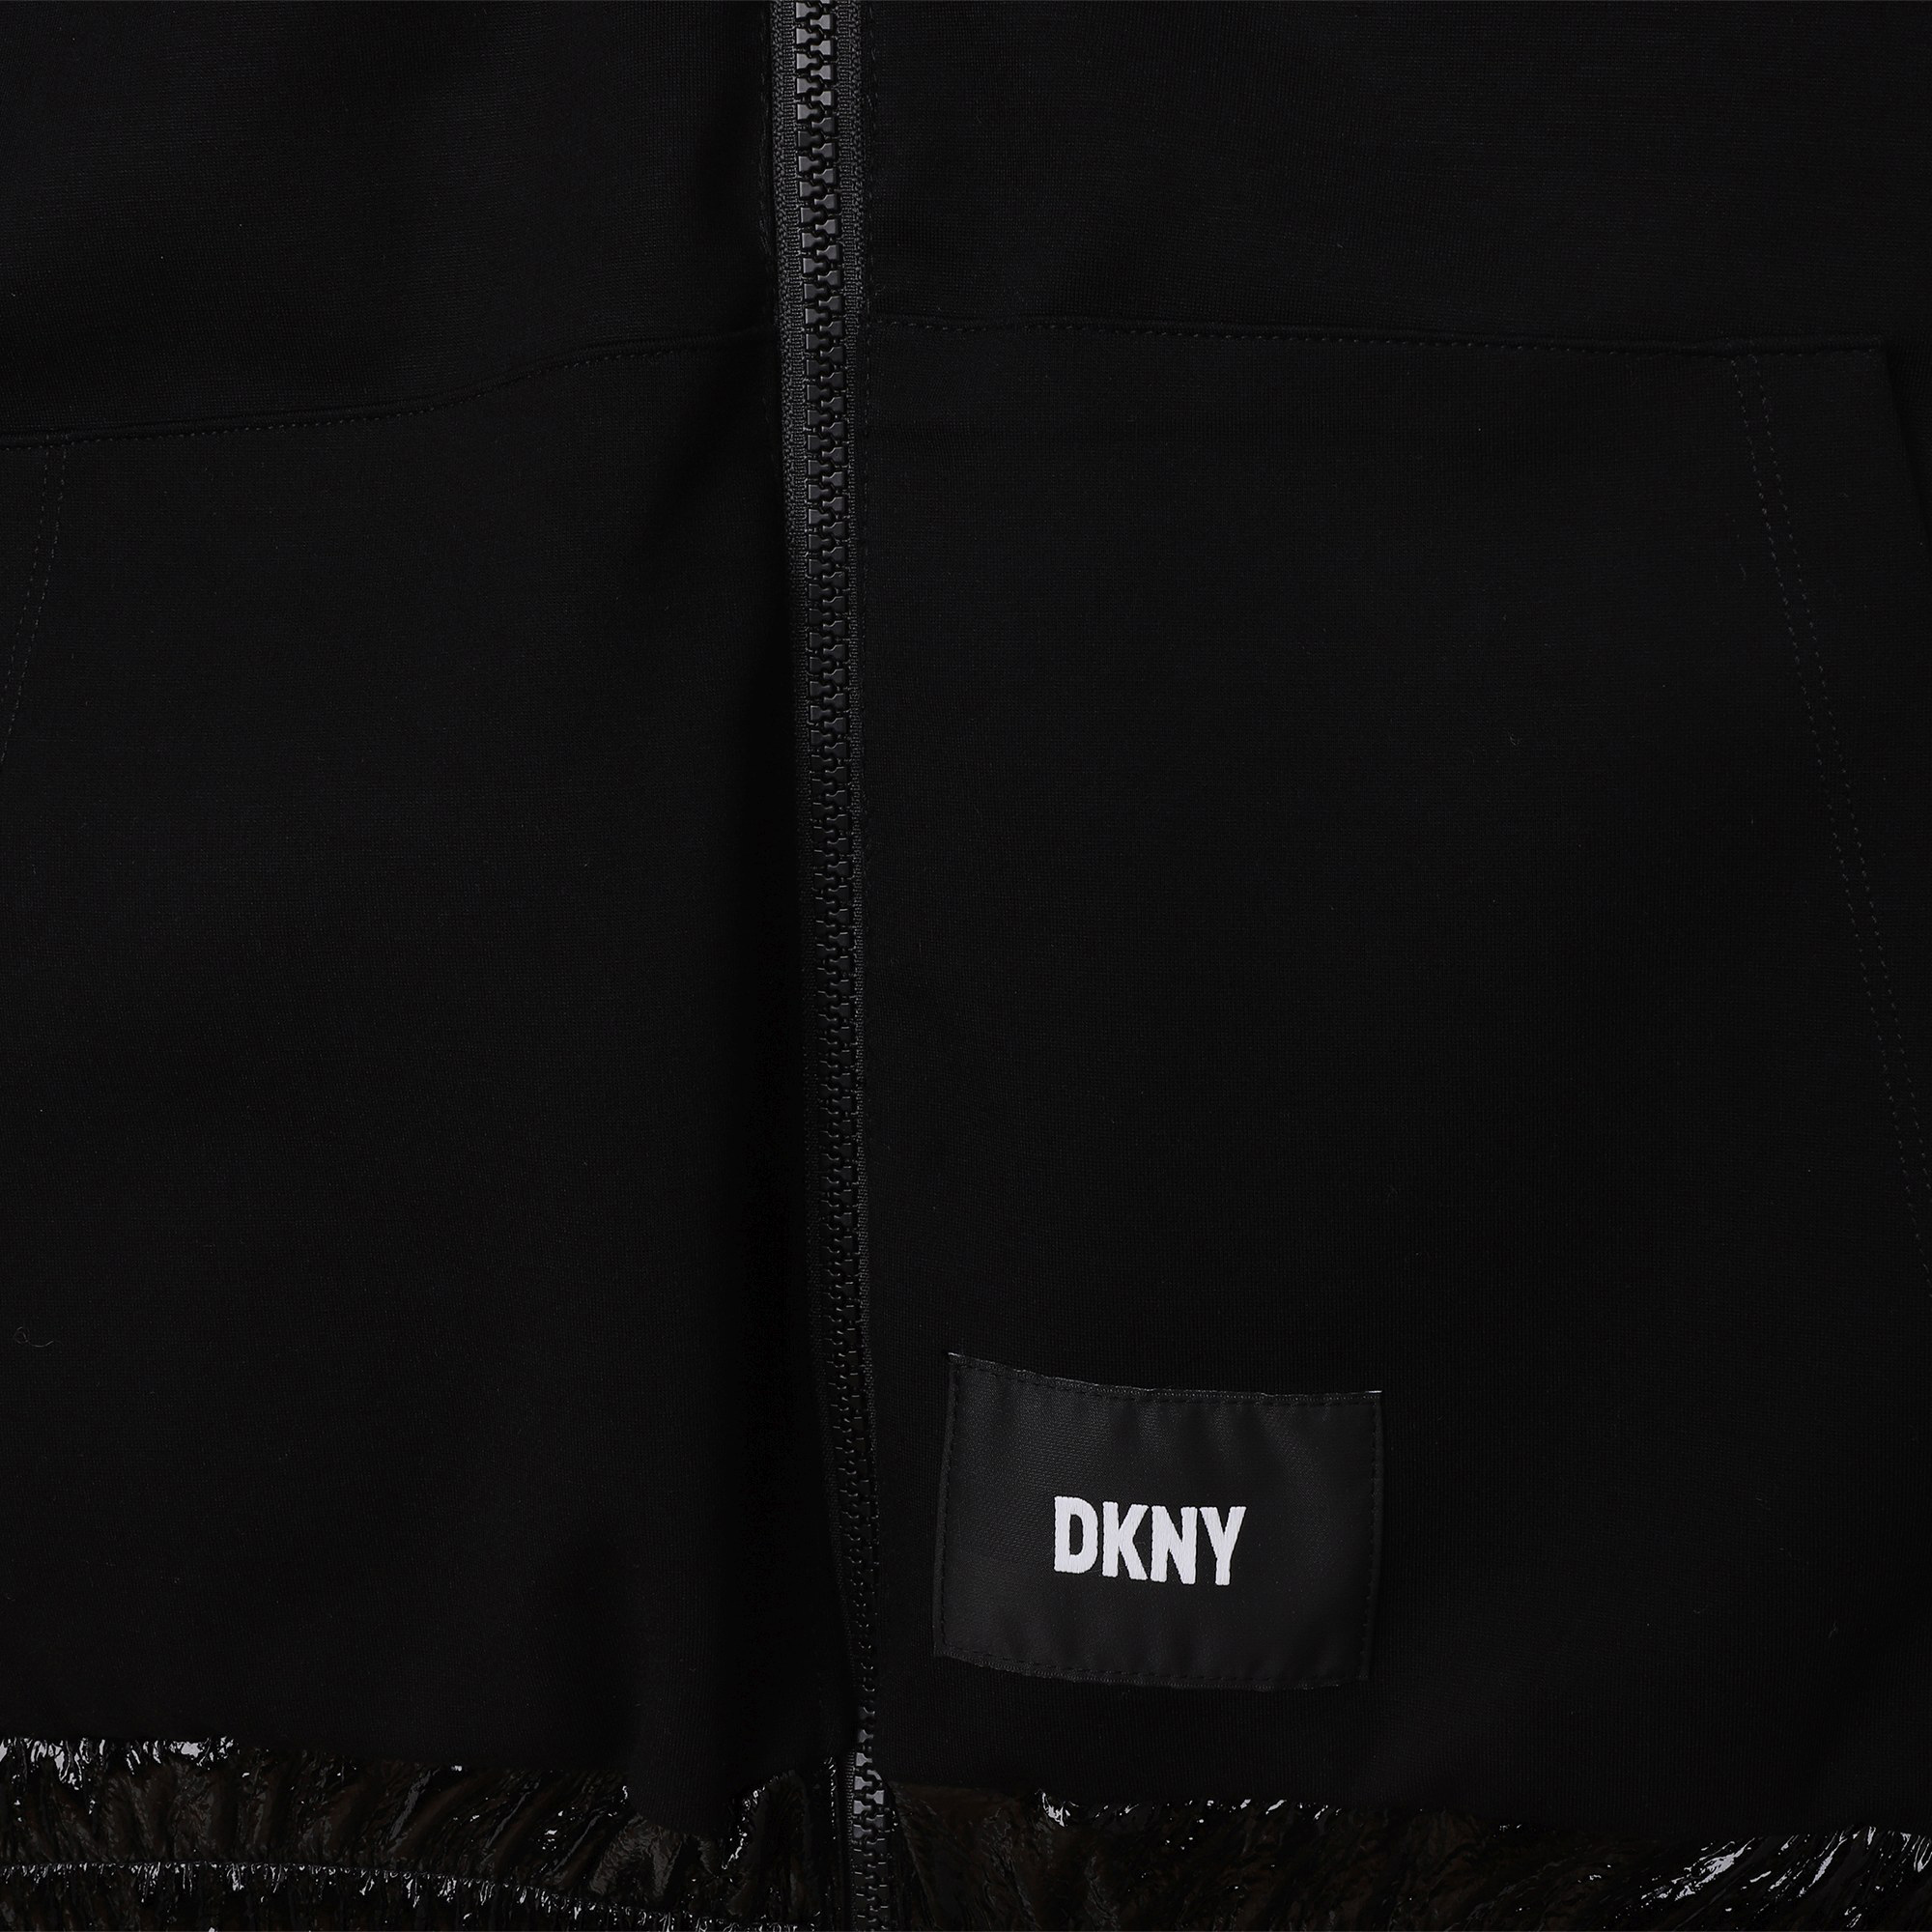 2-in-1 water-repellent parka DKNY for BOY